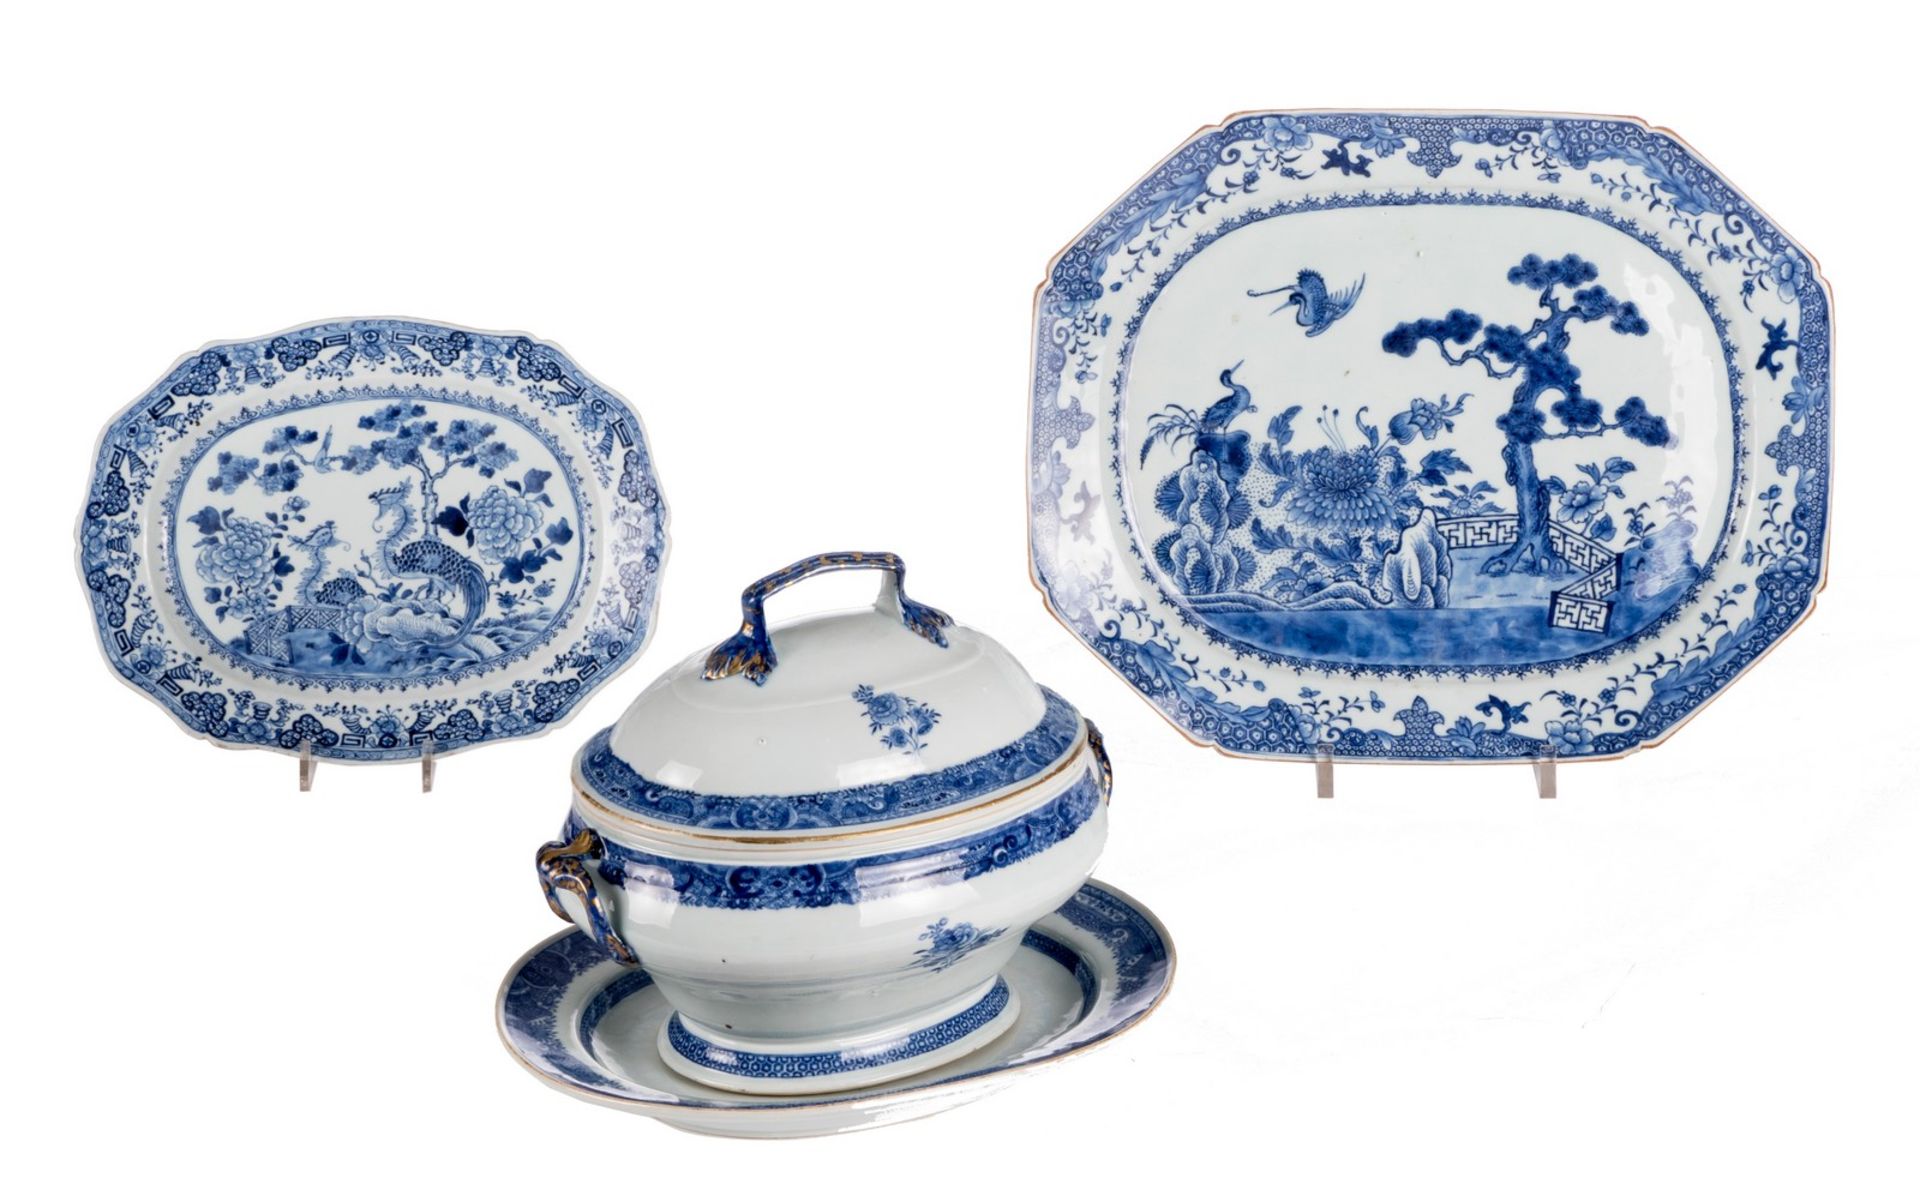 A Chinese blue and white and gilt decorated tureen on a matching plate with floral motives, 18thC;